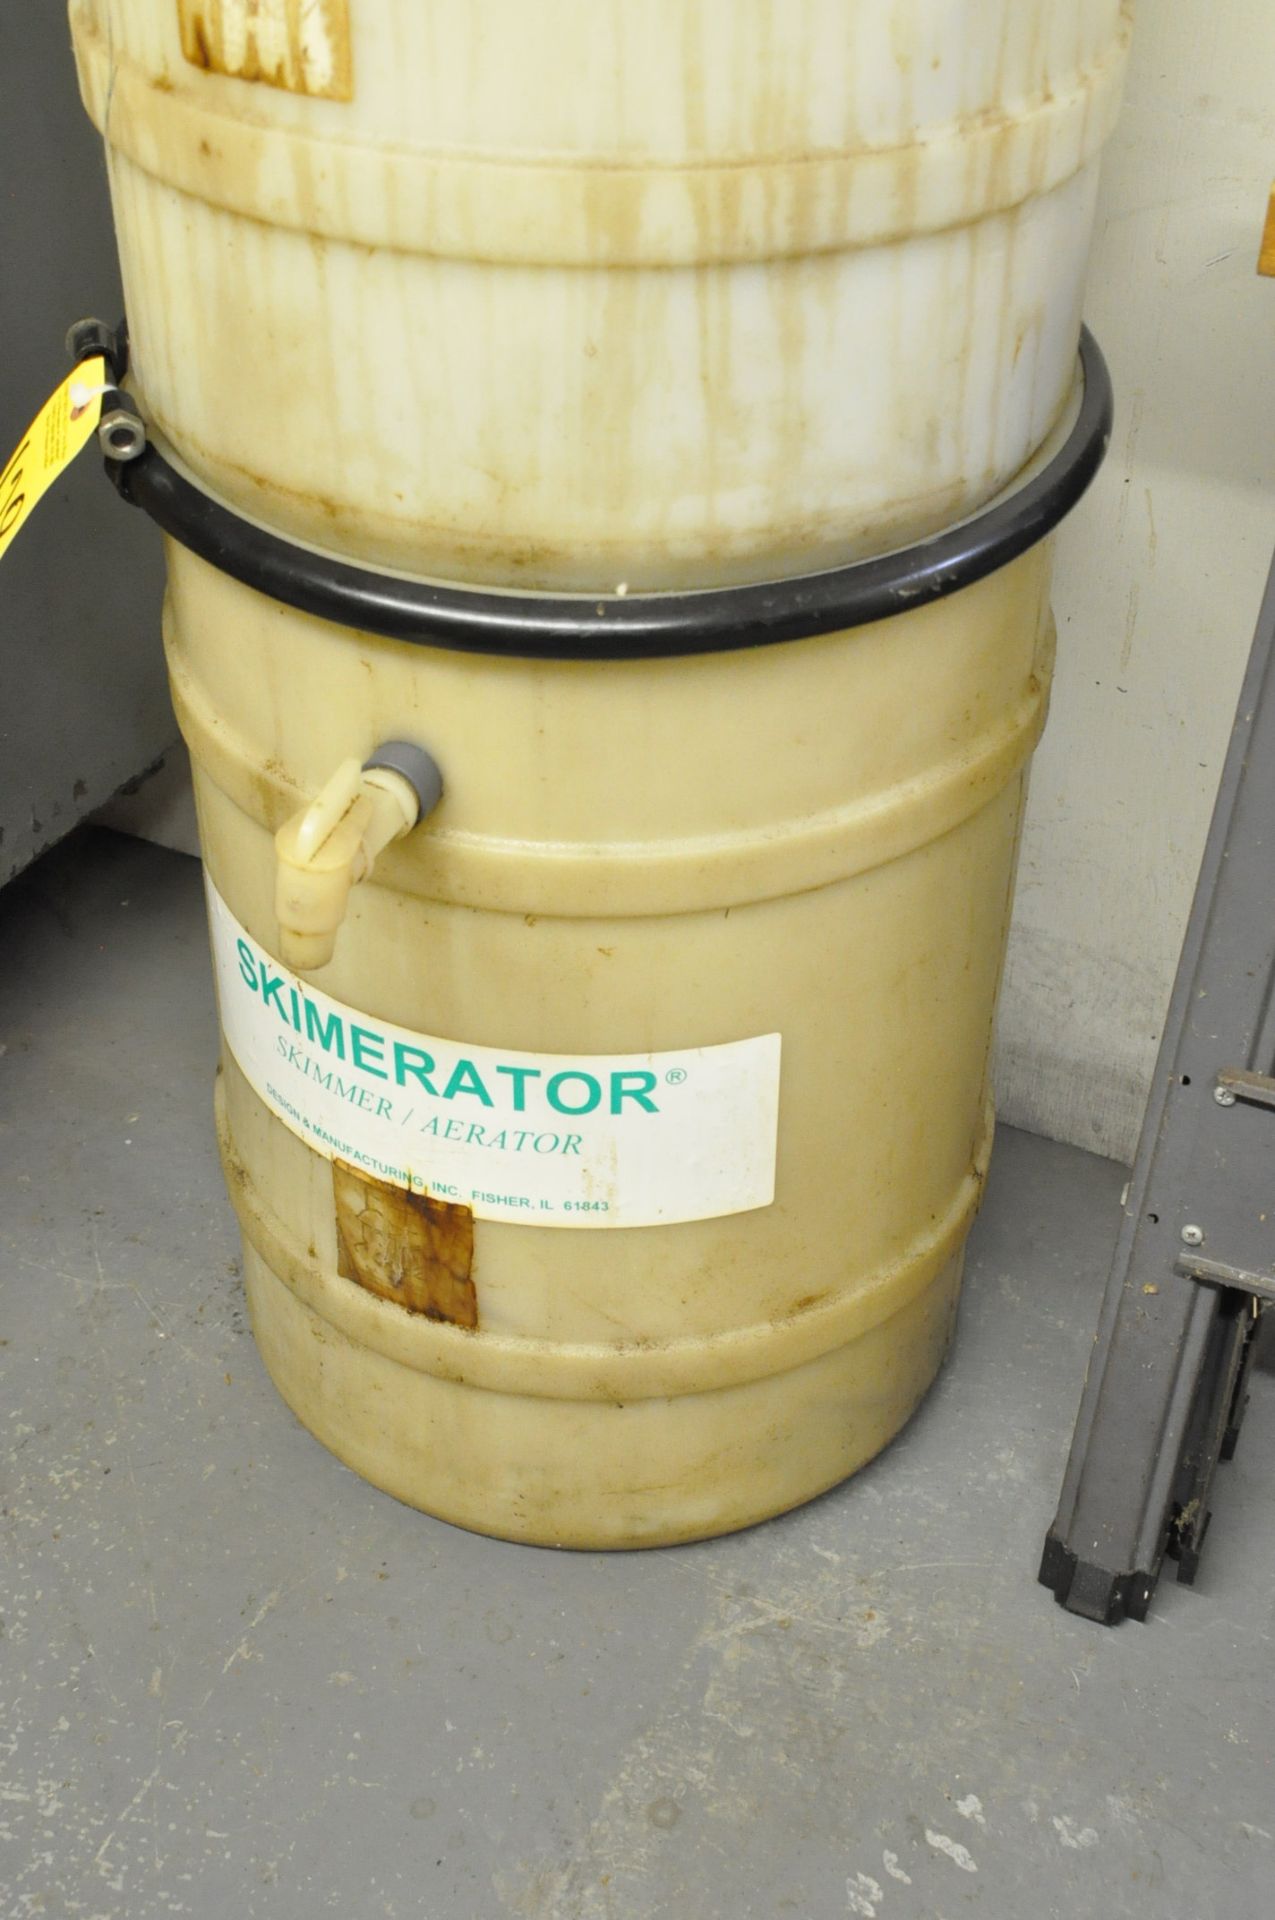 Skimerator in (1) Box with Containment Drum - Image 2 of 2